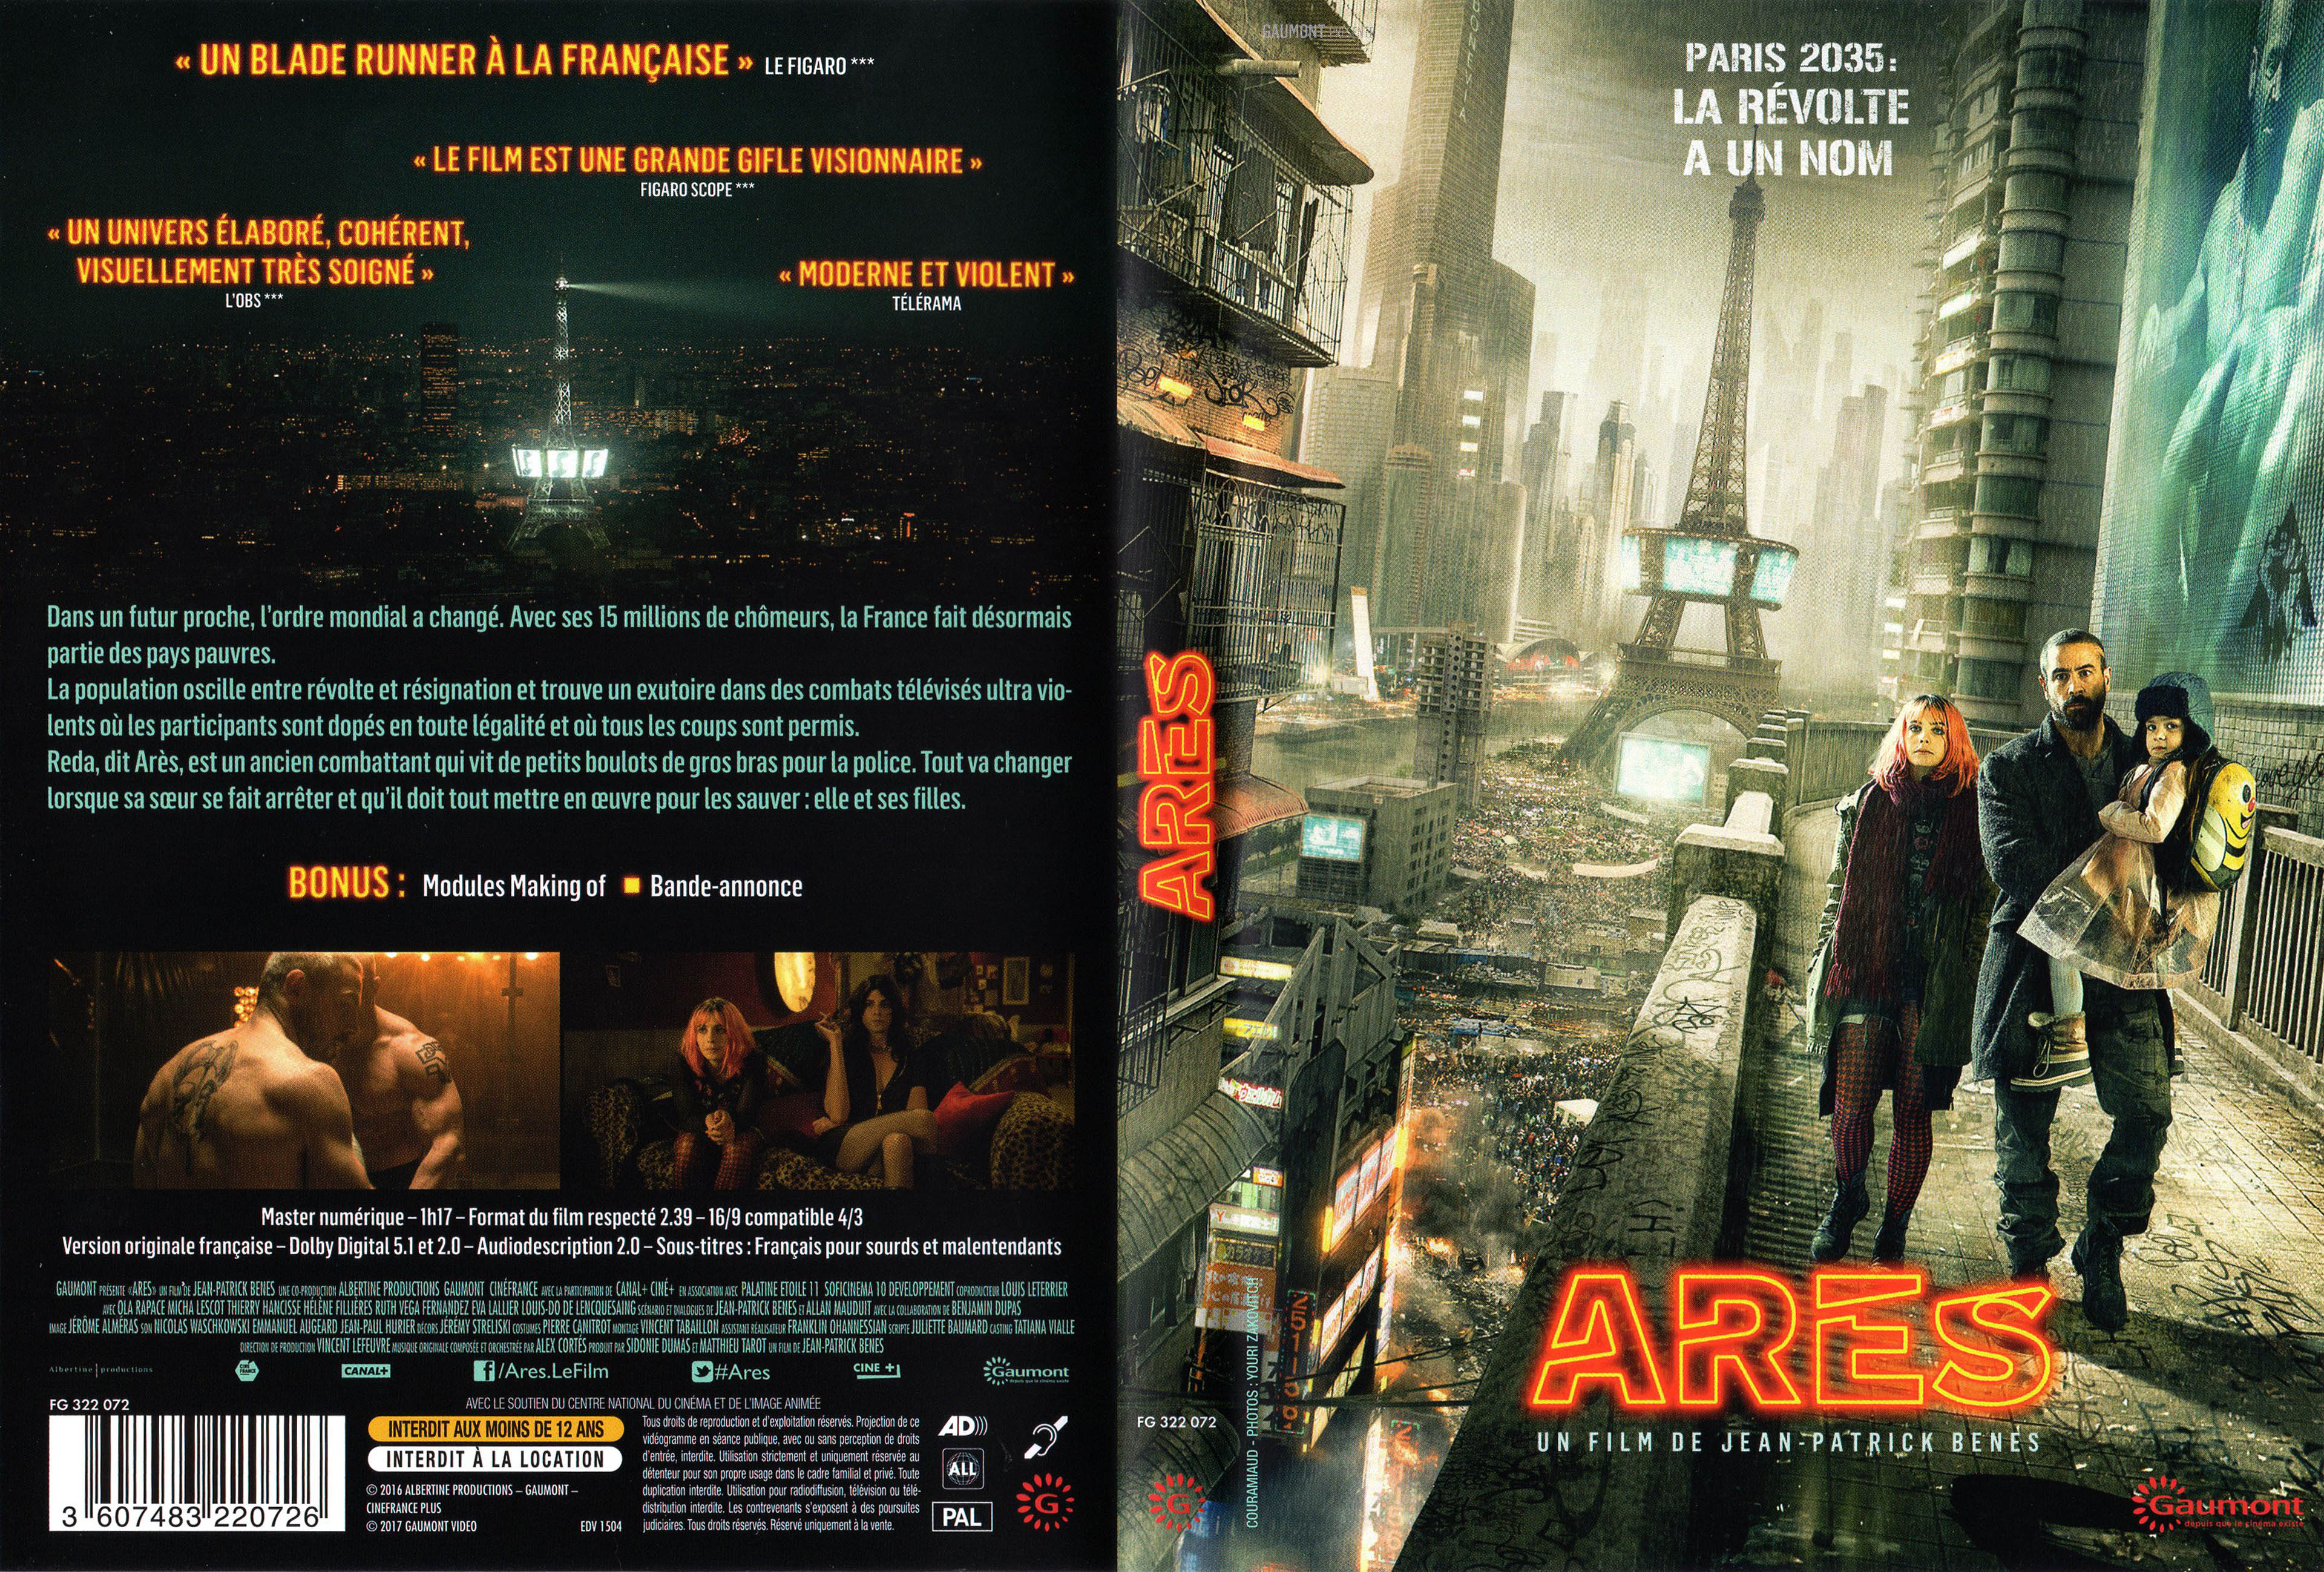 Jaquette DVD Ares